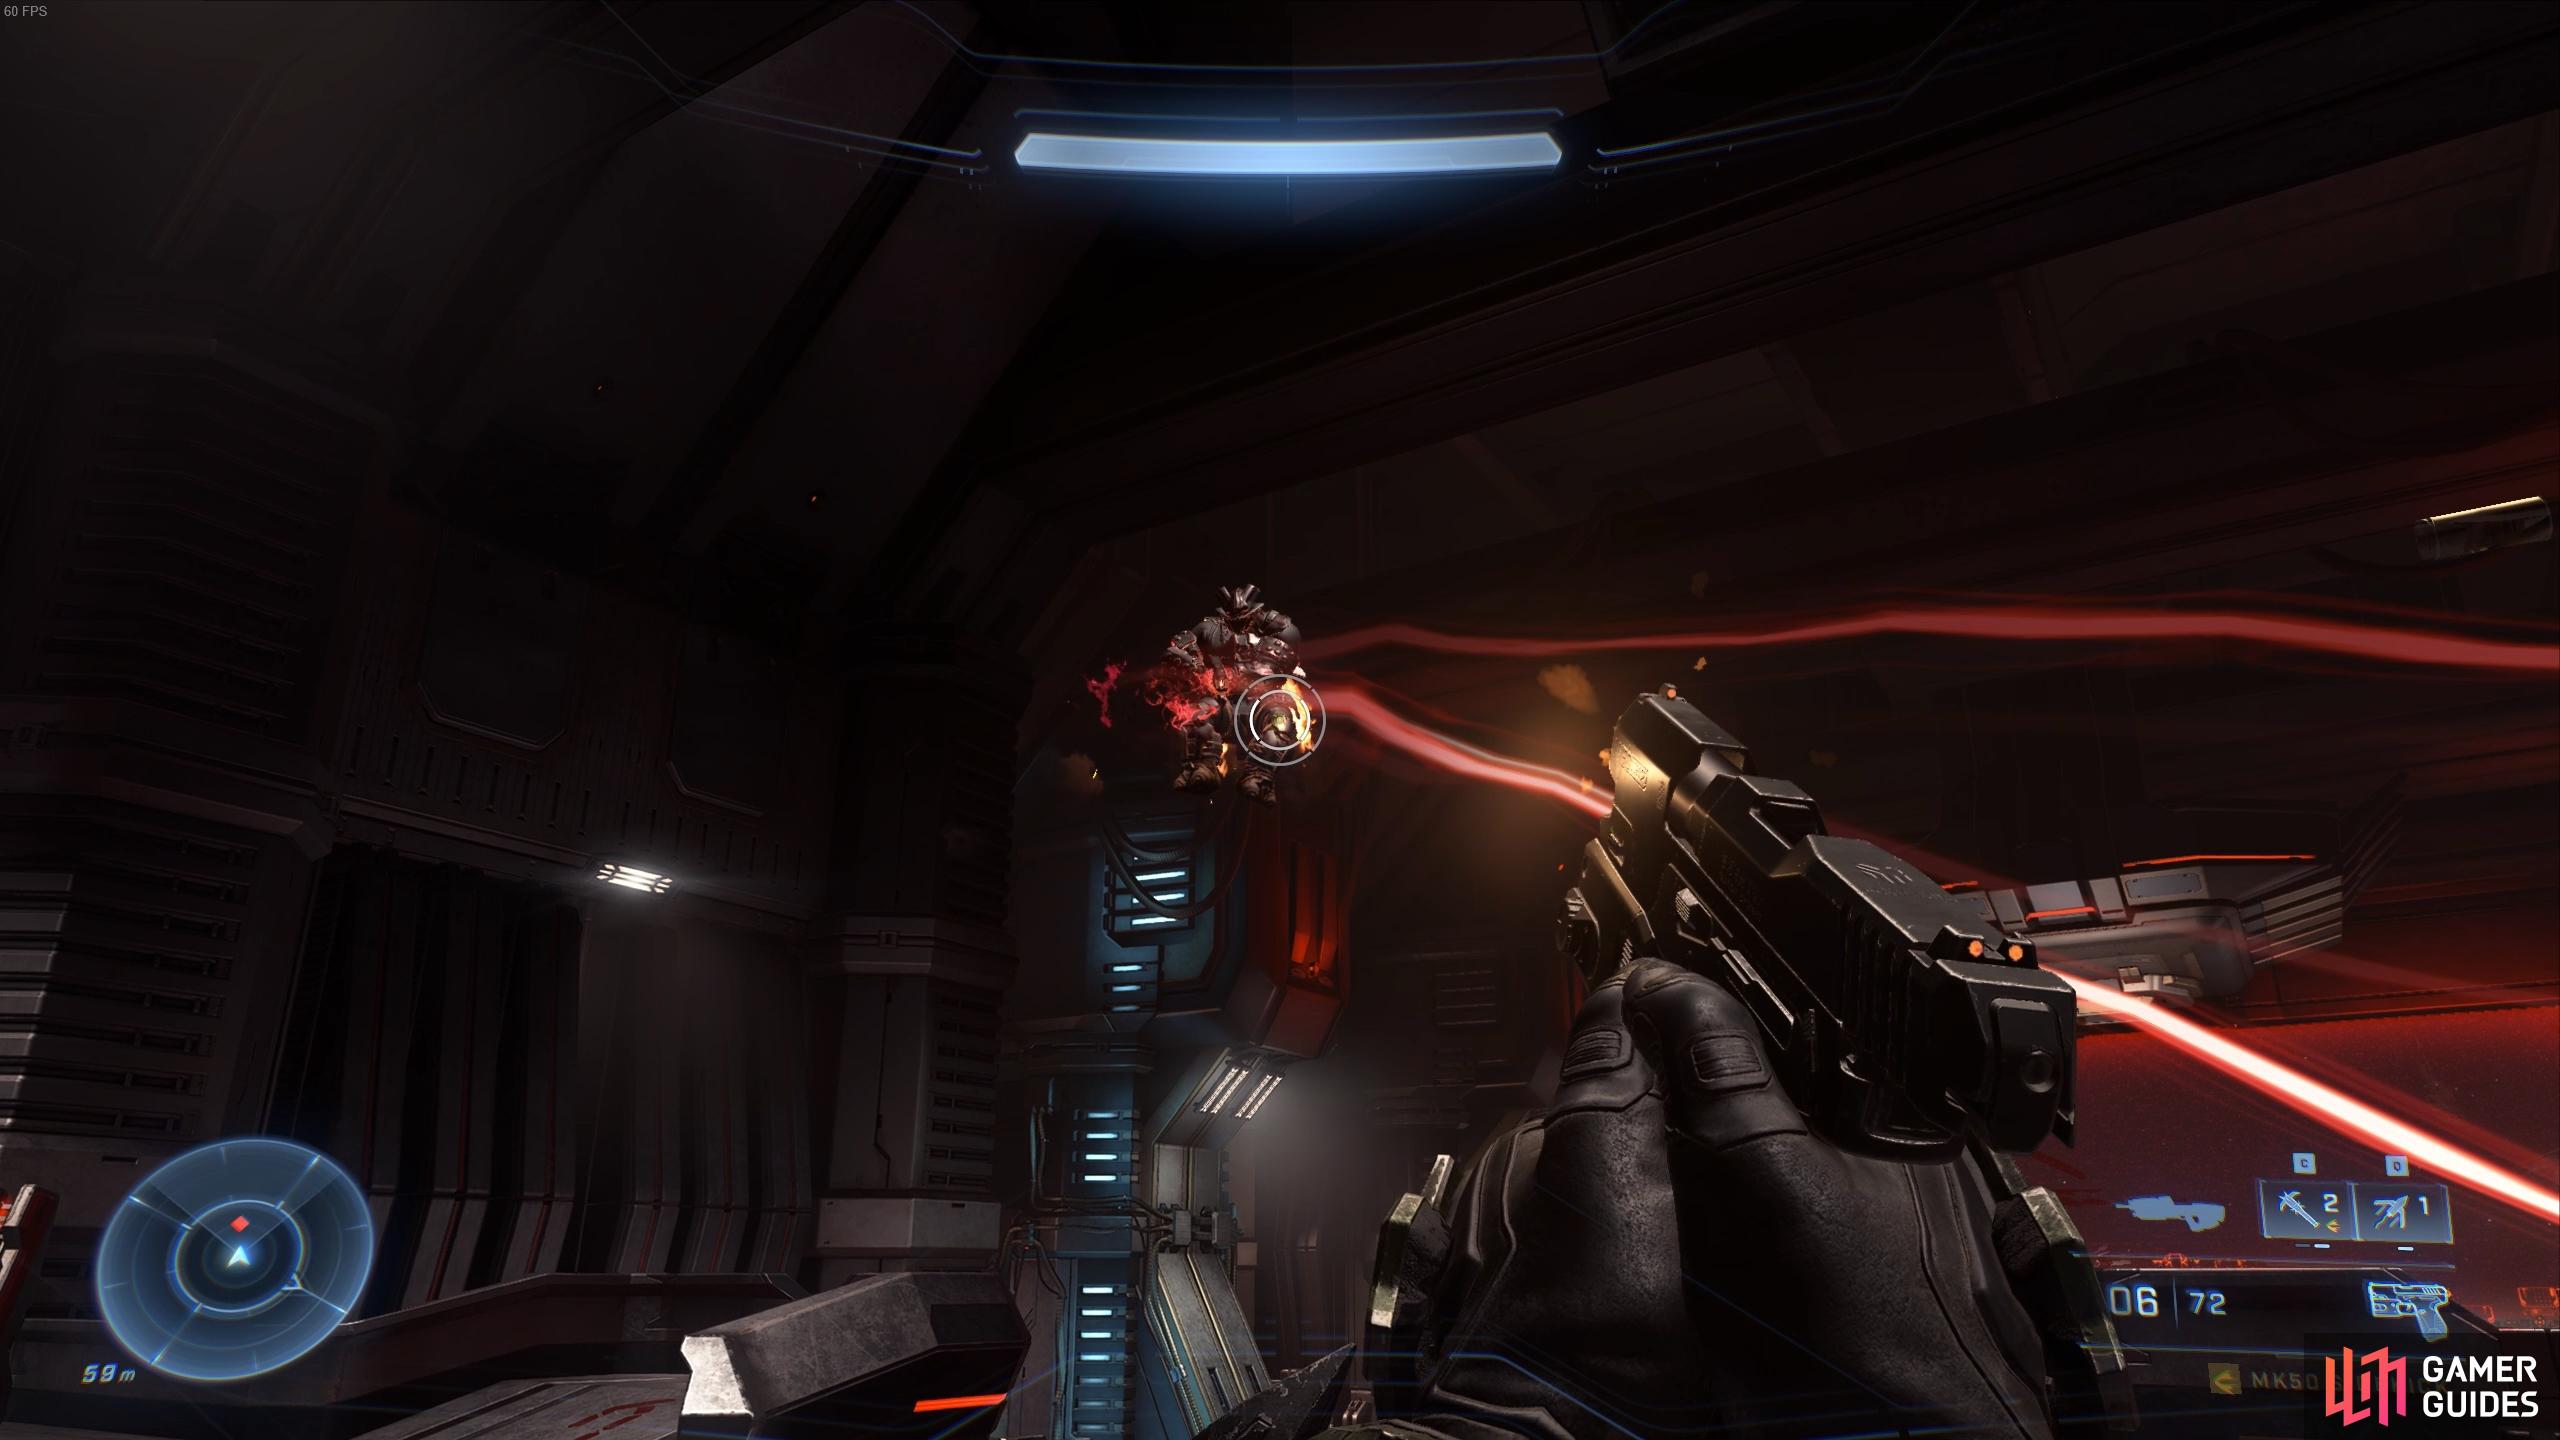 Focus on killing the flyting Brute with the Ravager at the bridge of the ship.